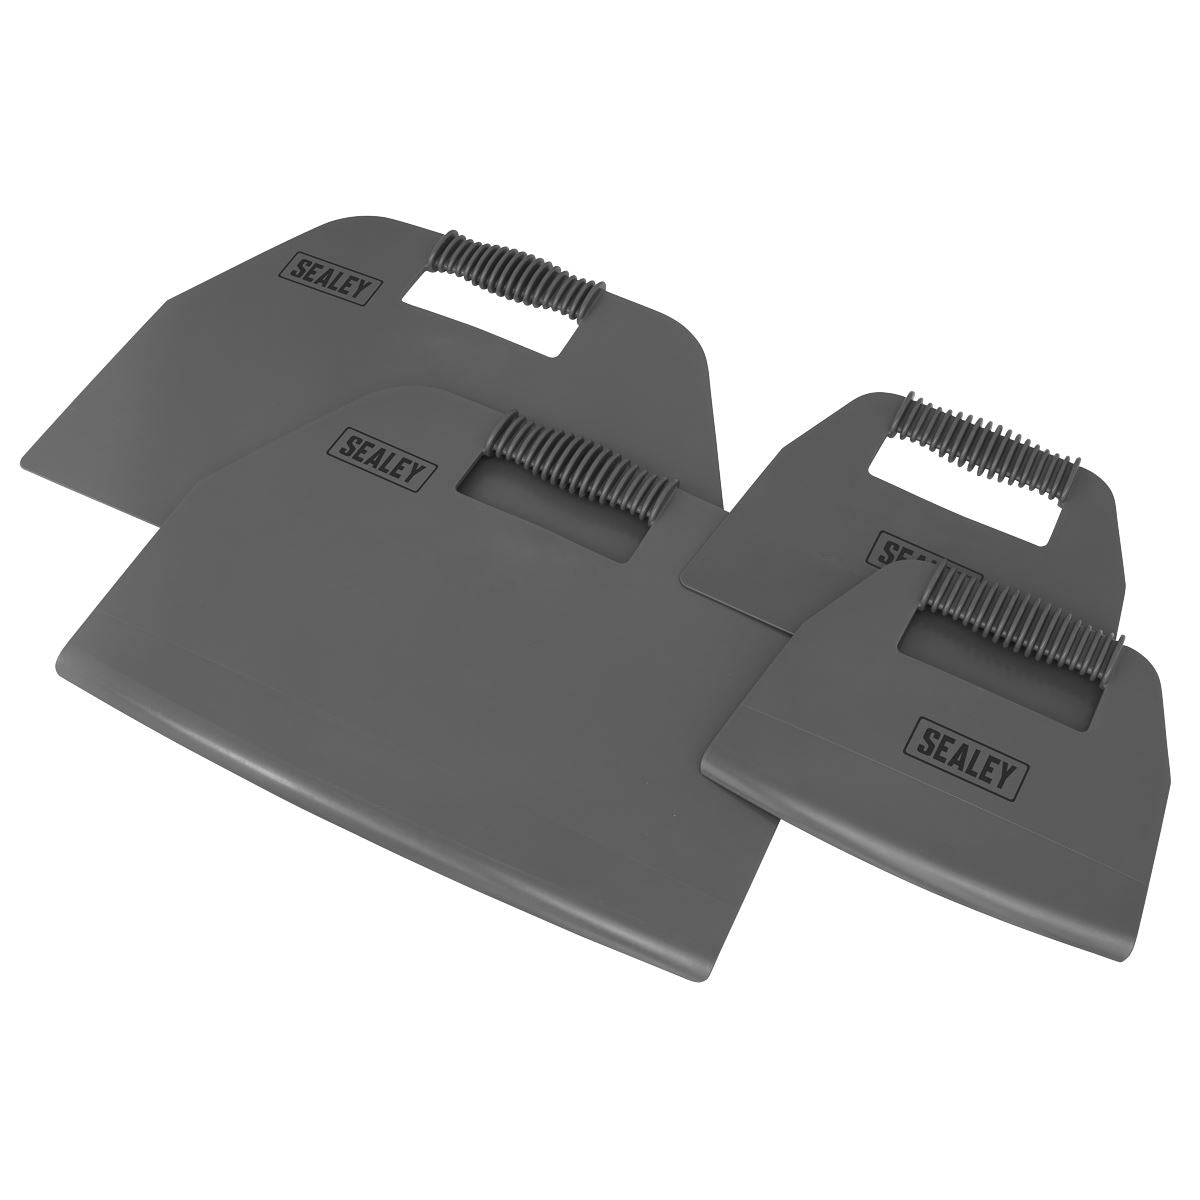 Sealey Dashboard Protection Set 4pc